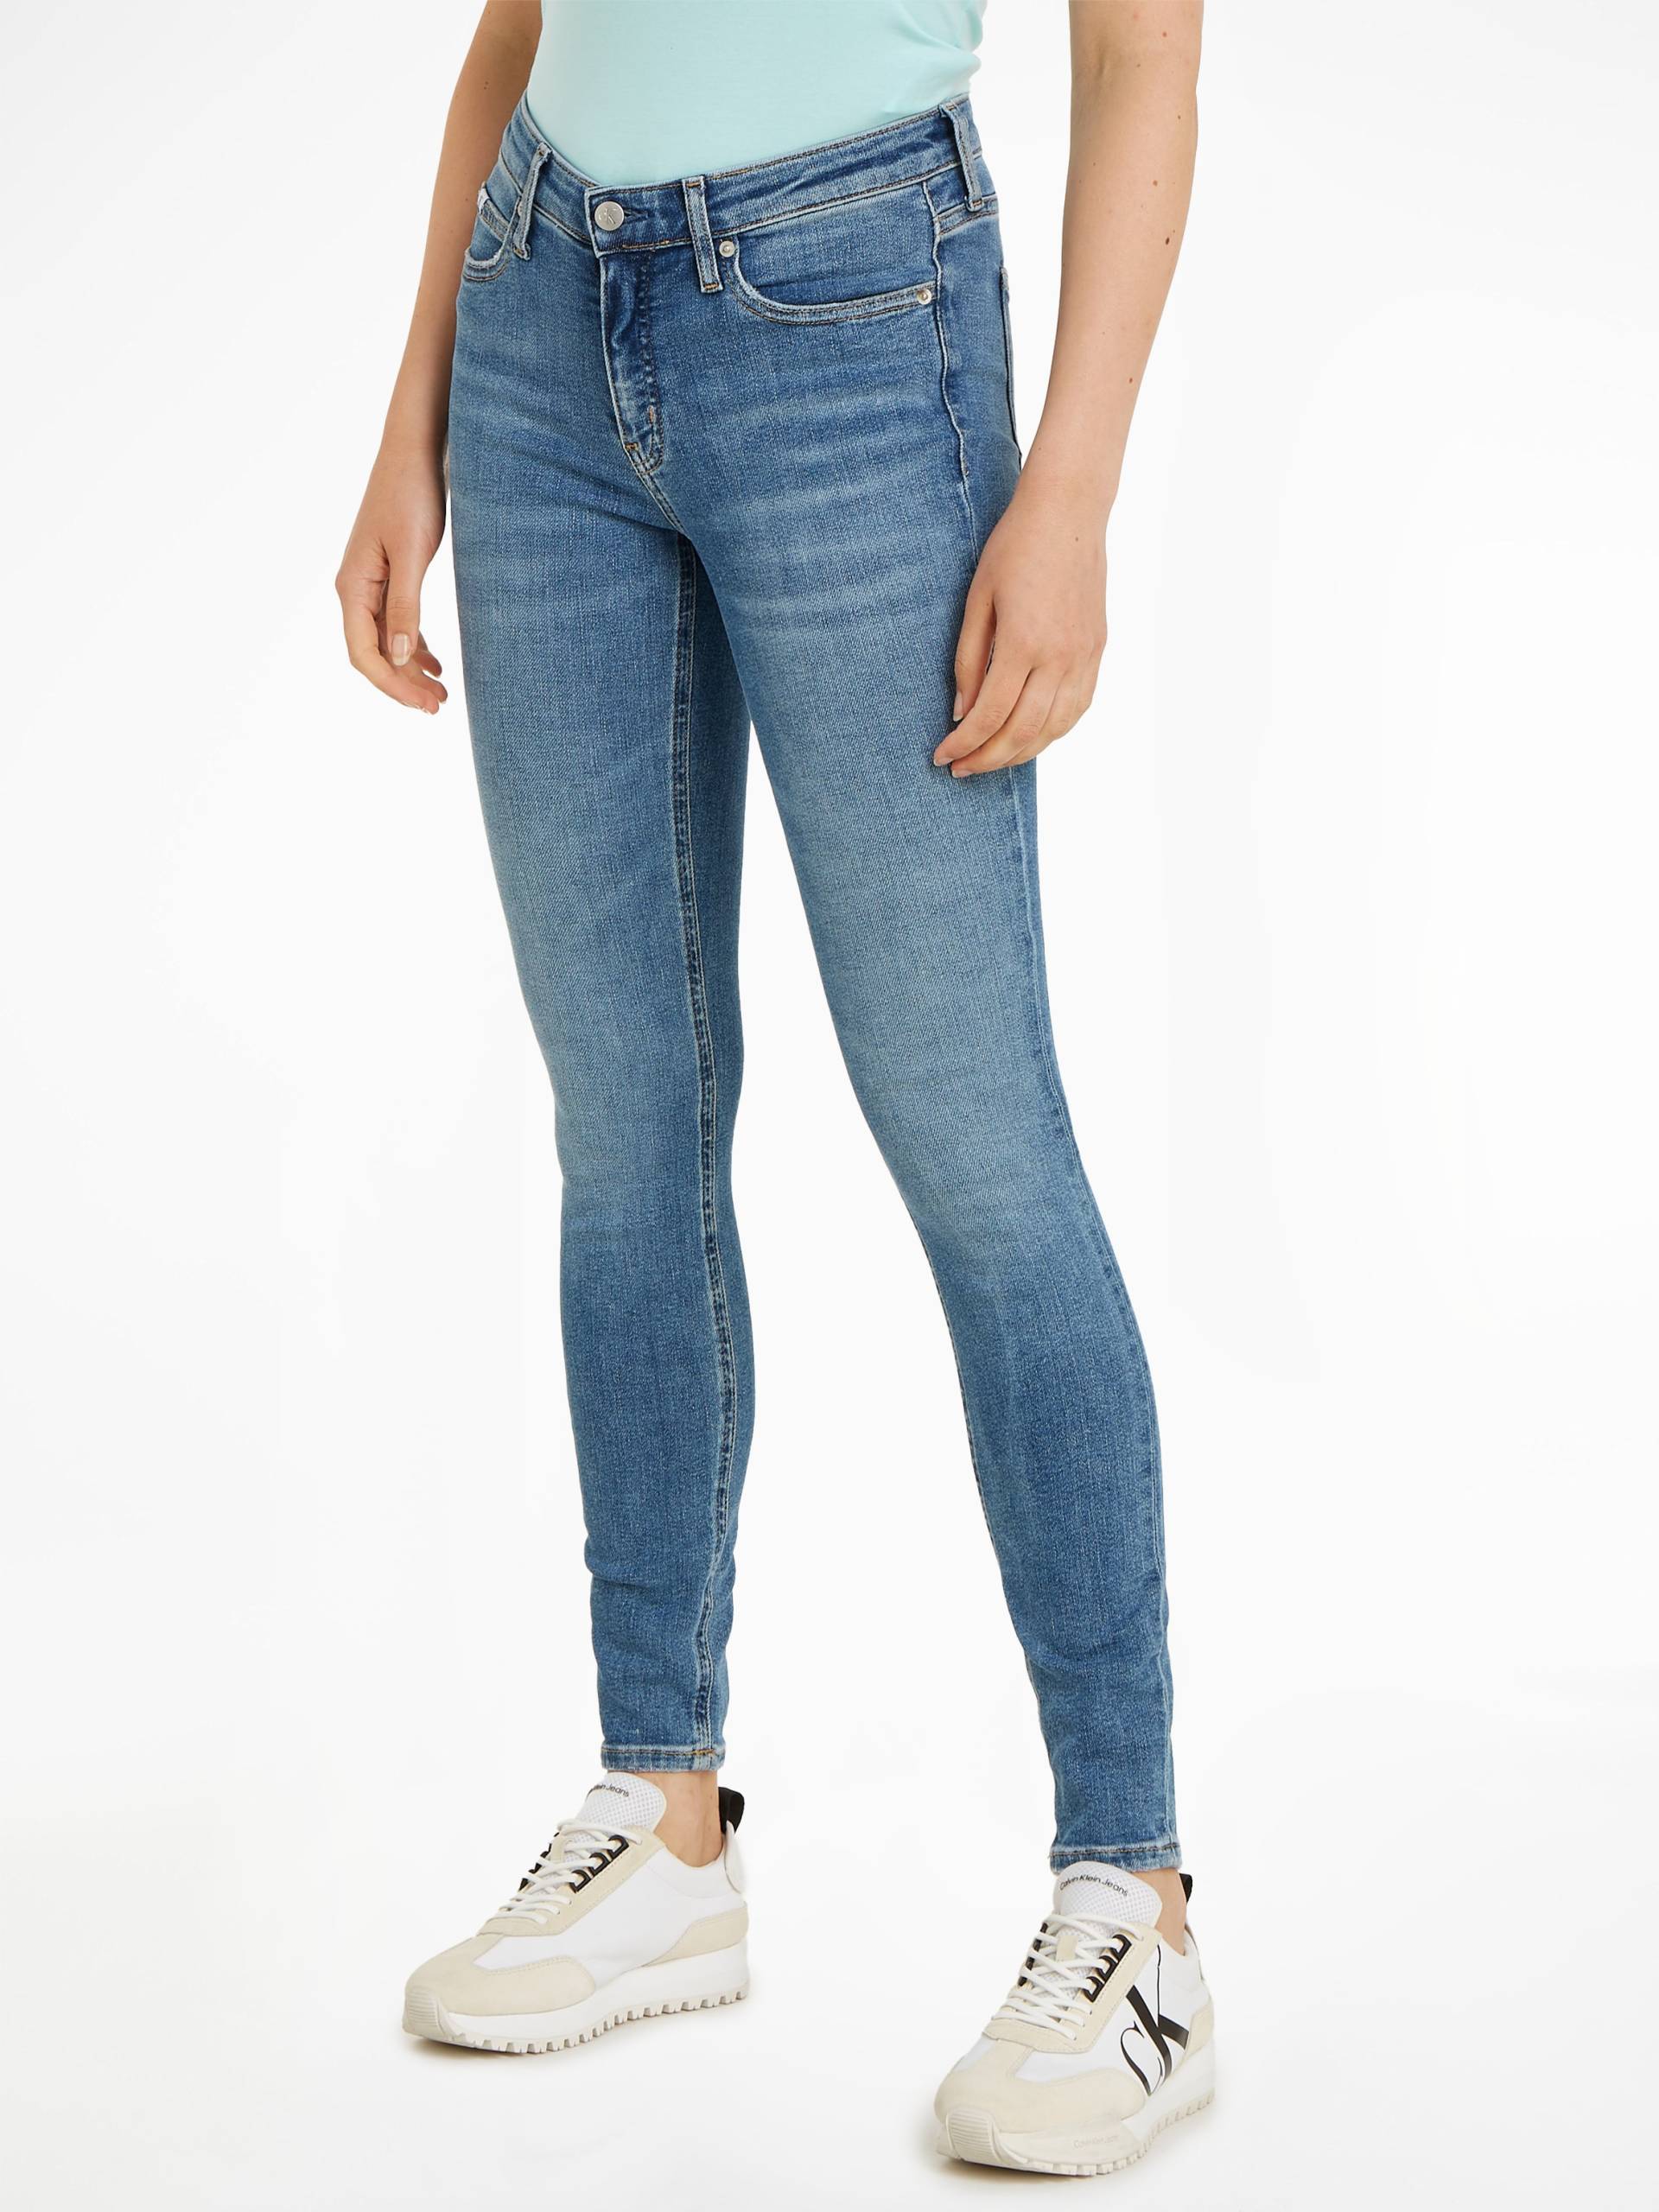 Calvin Klein Jeans Skinny-fit-Jeans »MID RISE SKINNY«, mit Markenlabel von Calvin Klein Jeans